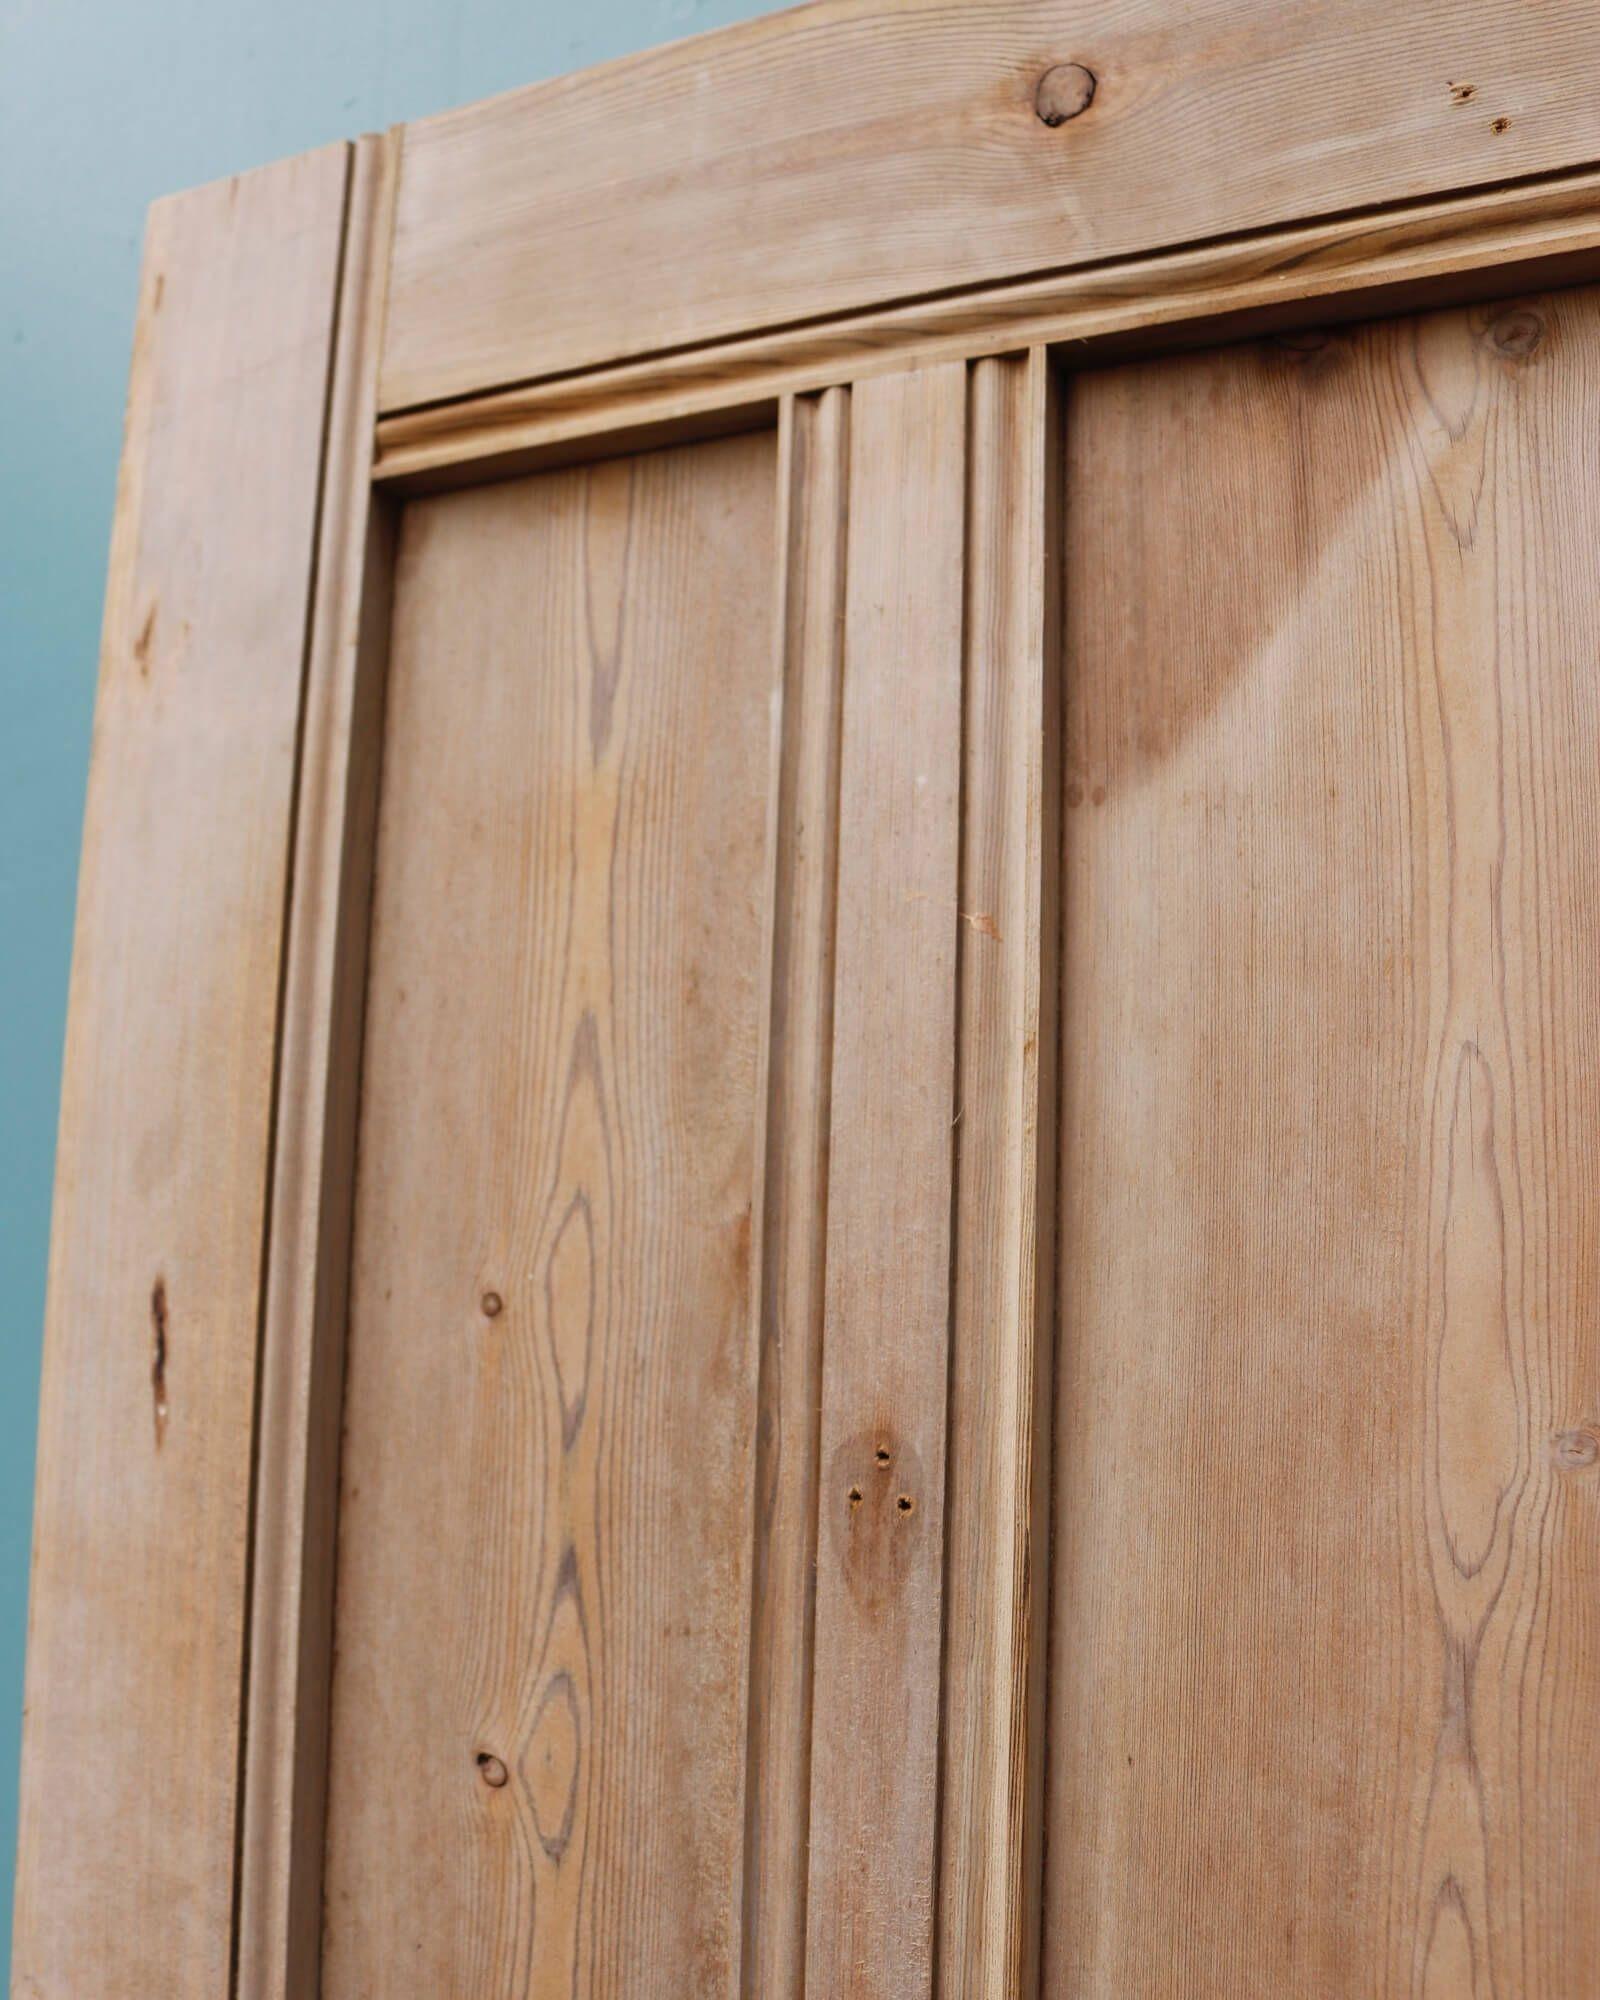 English Arts & Crafts Stripped Pine Internal Doors (6 Available) For Sale